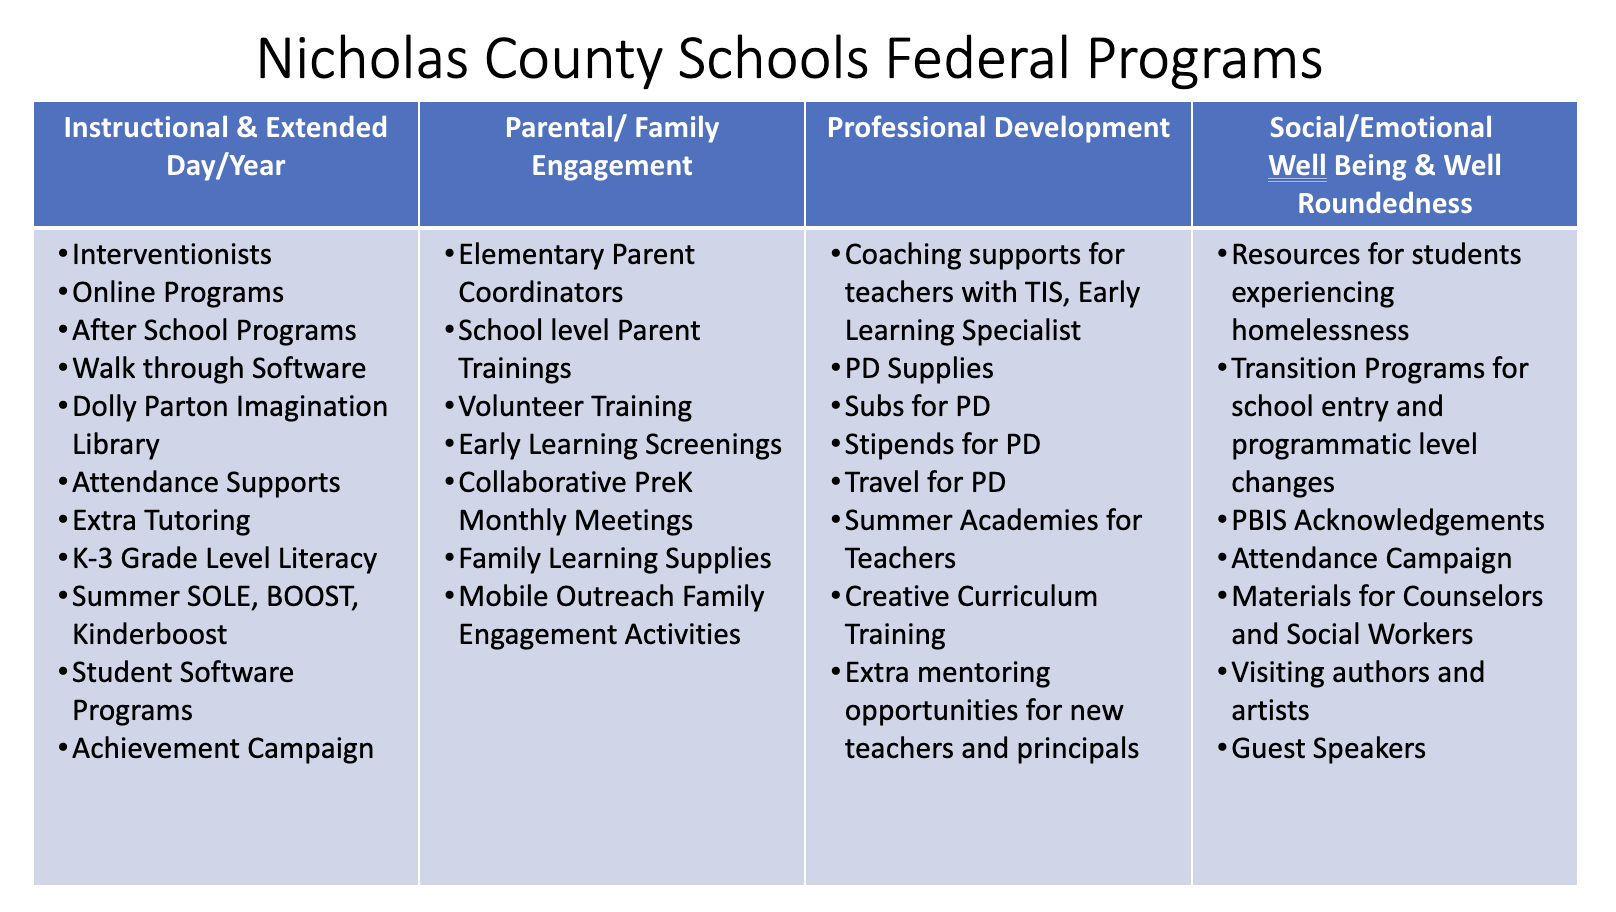 Table showing Federal Programs